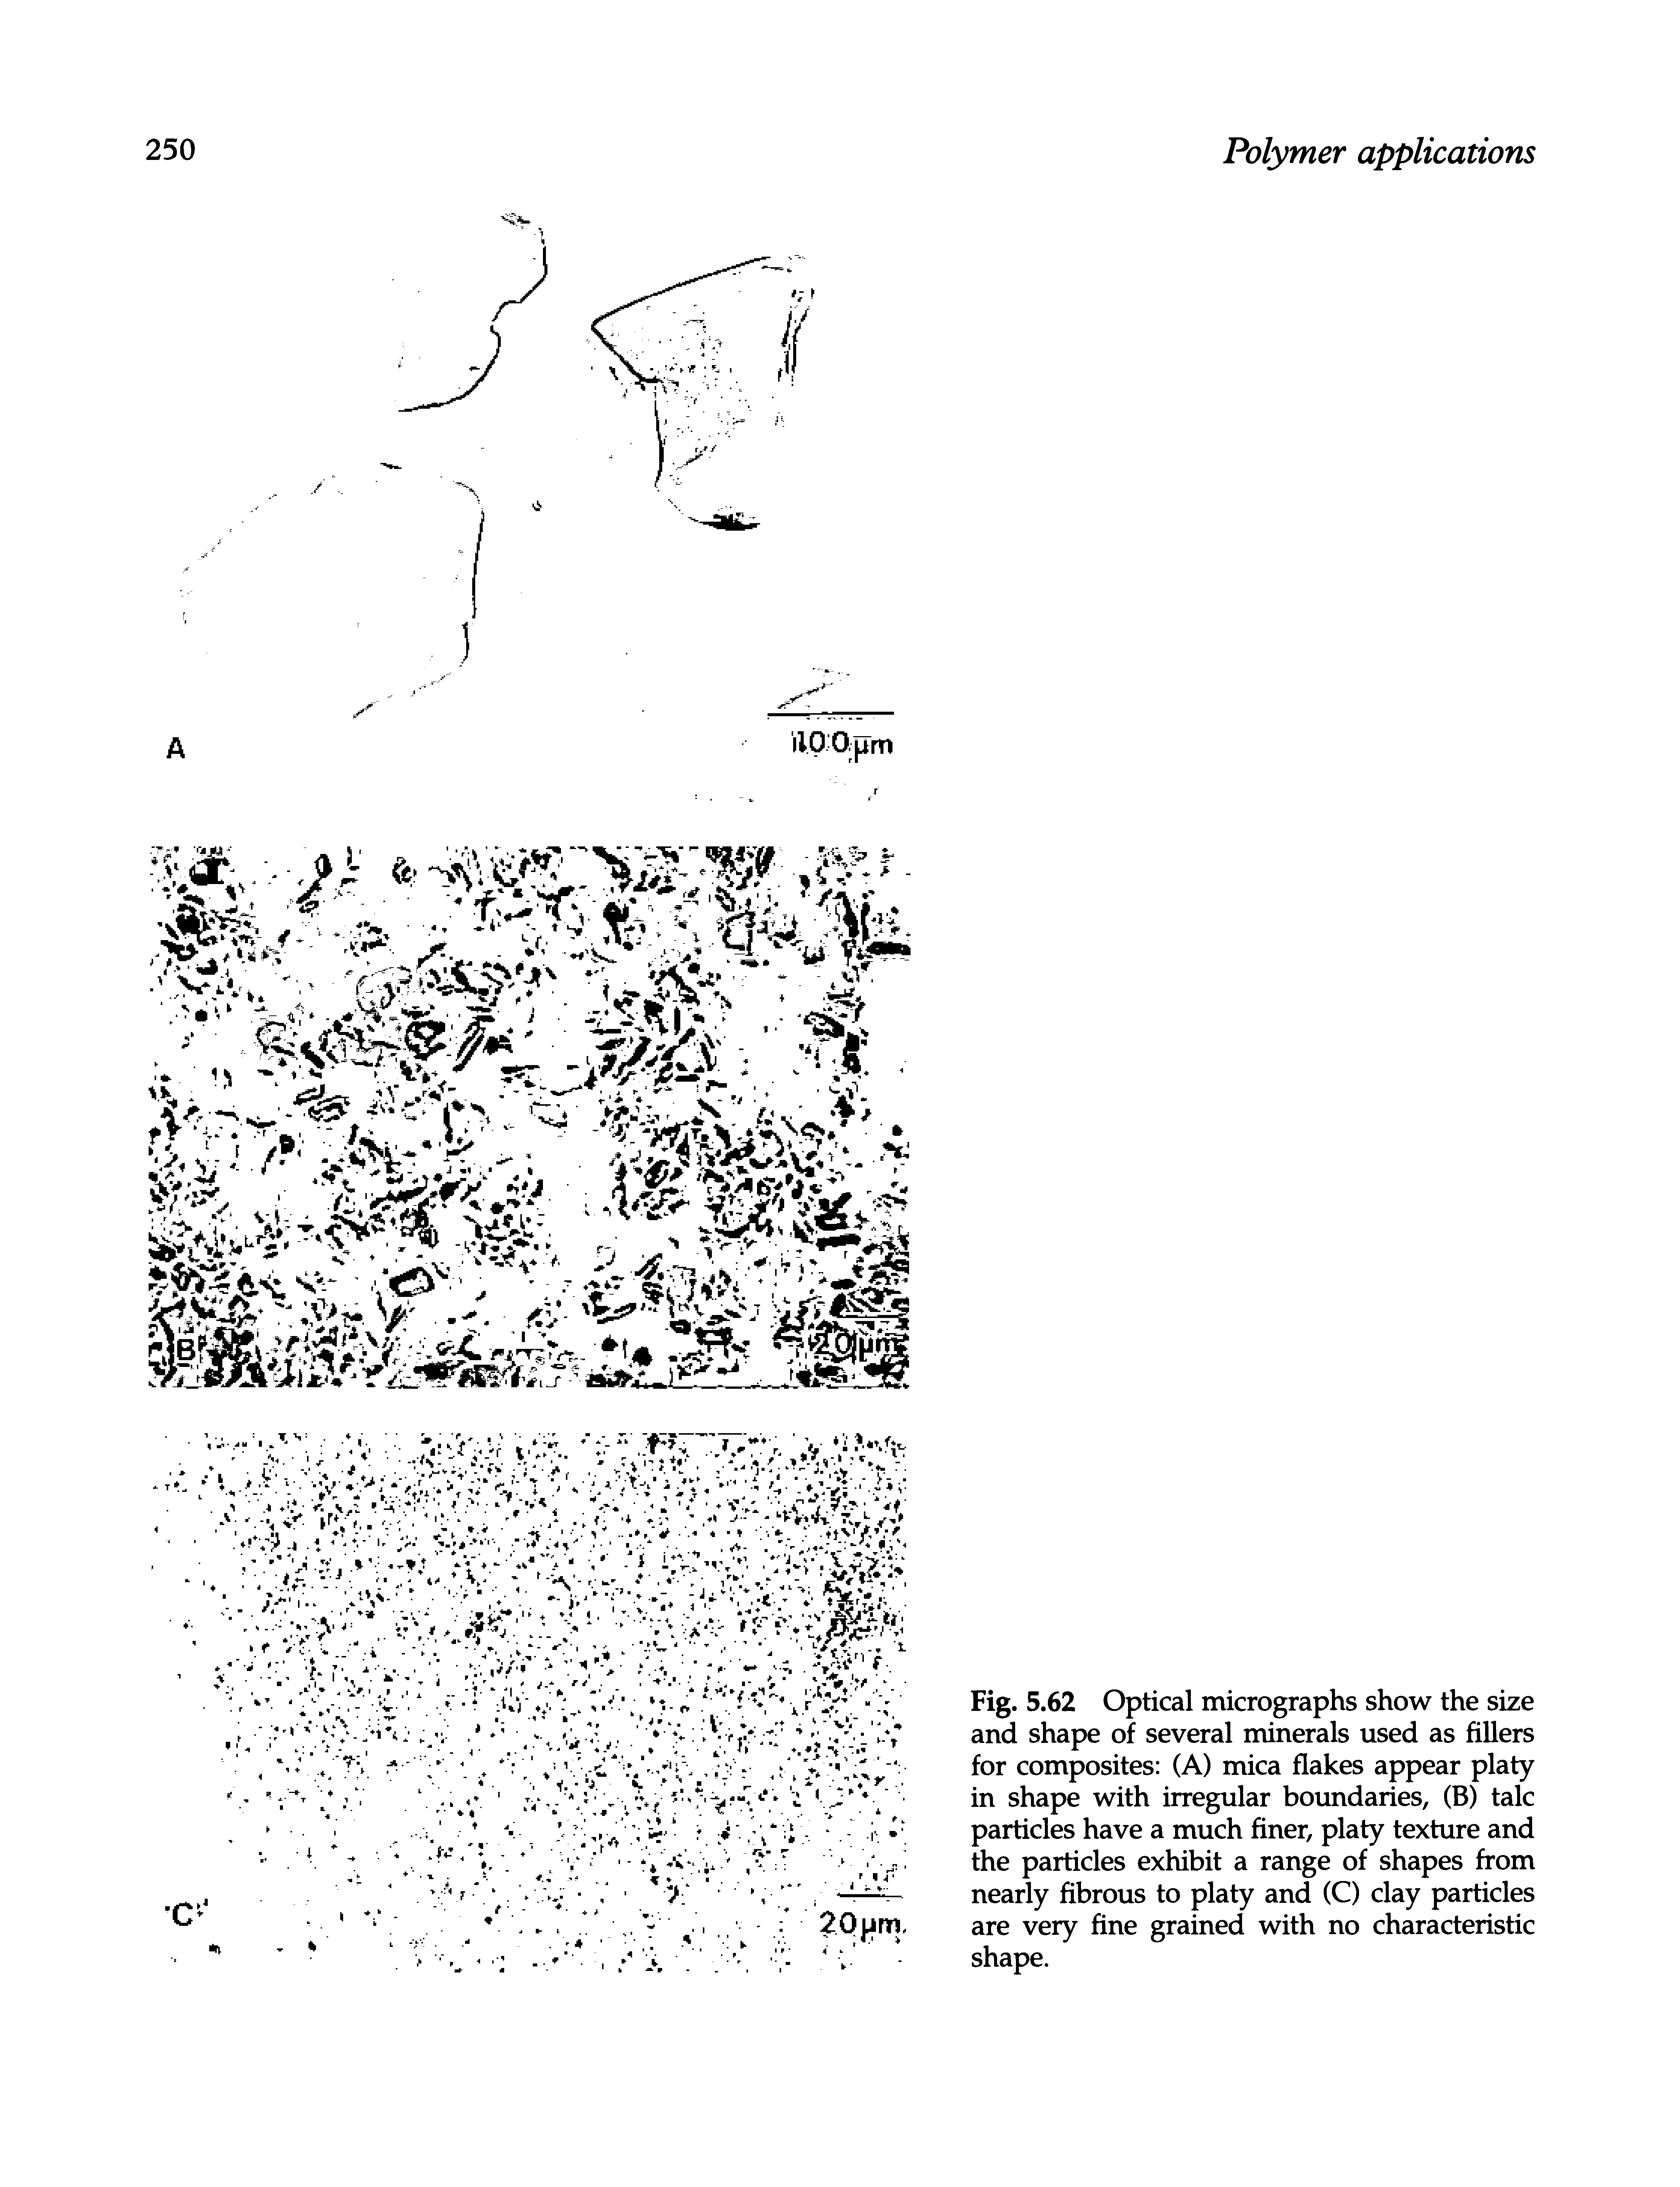 Fig. 5.62 Optical micrographs show the size and shape of several minerals used as fillers for composites (A) mica flakes appear platy in shape with irregular boundaries, (B) talc particles have a much finer, platy texture and the particles exhibit a range of shapes from nearly fibrous to platy and (C) clay particles are very fine grained with no characteristic shape.